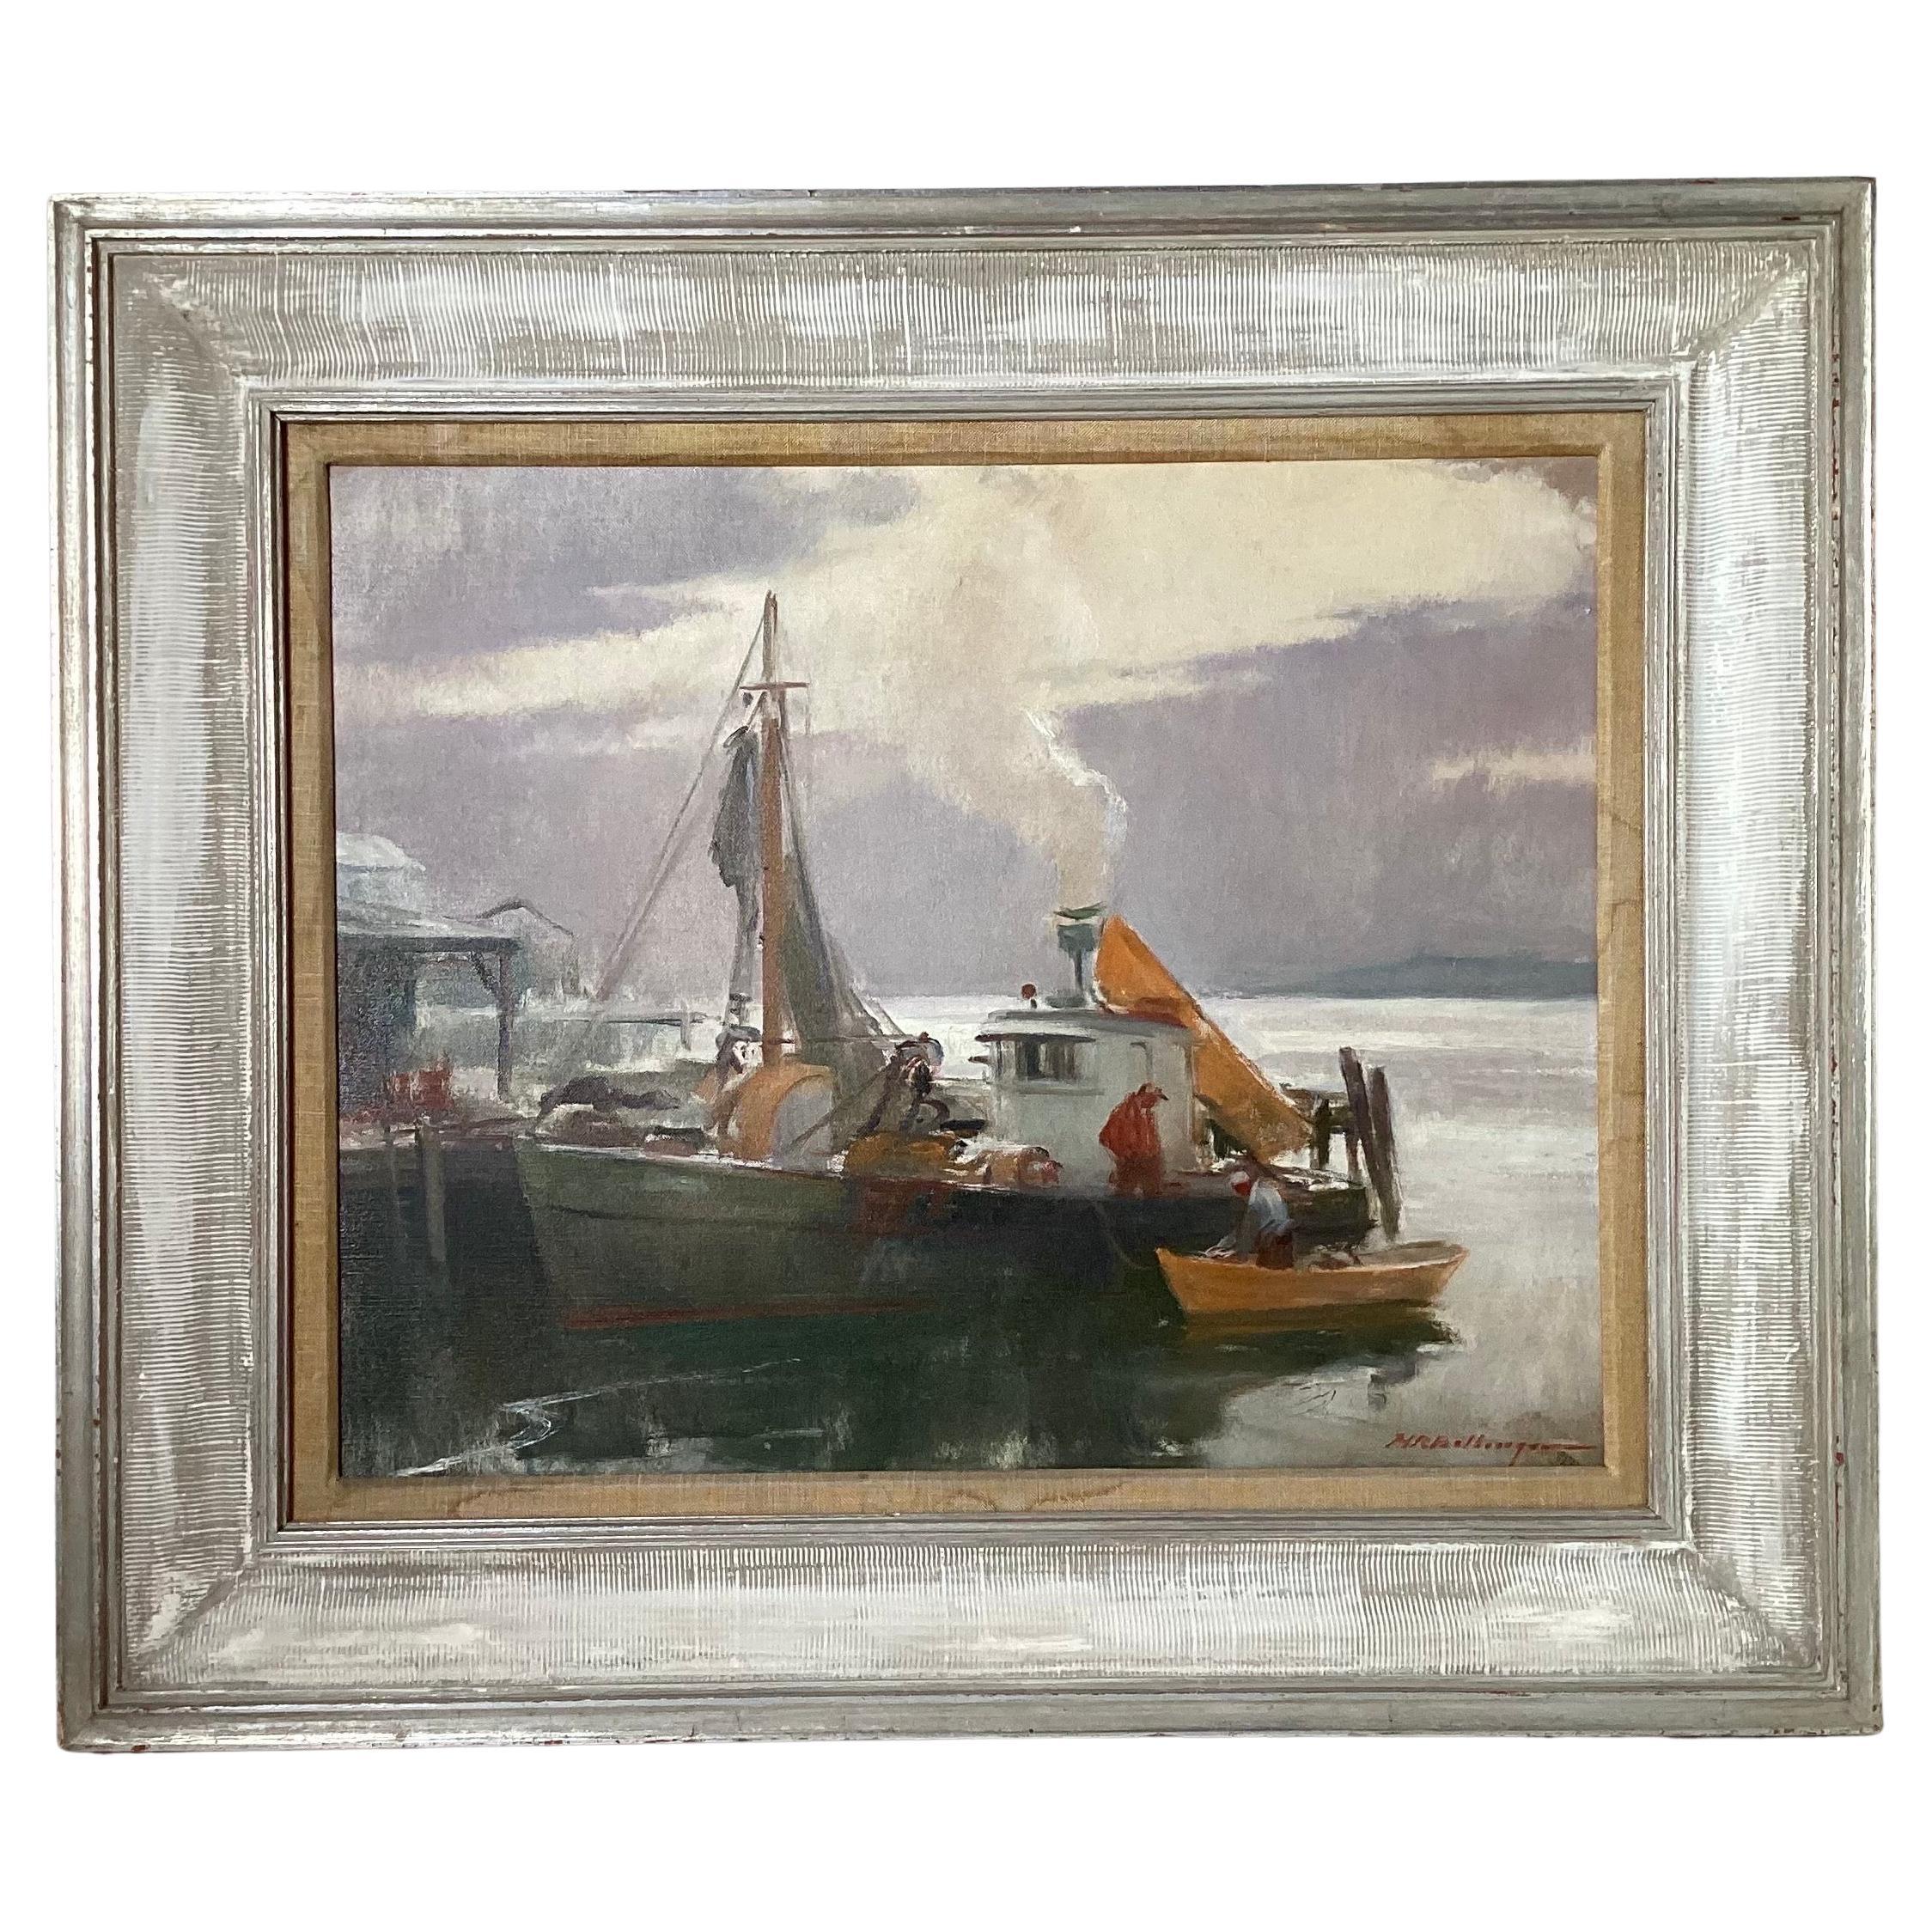 Early 20th Century Oil on Canvas "Boat in Harbor